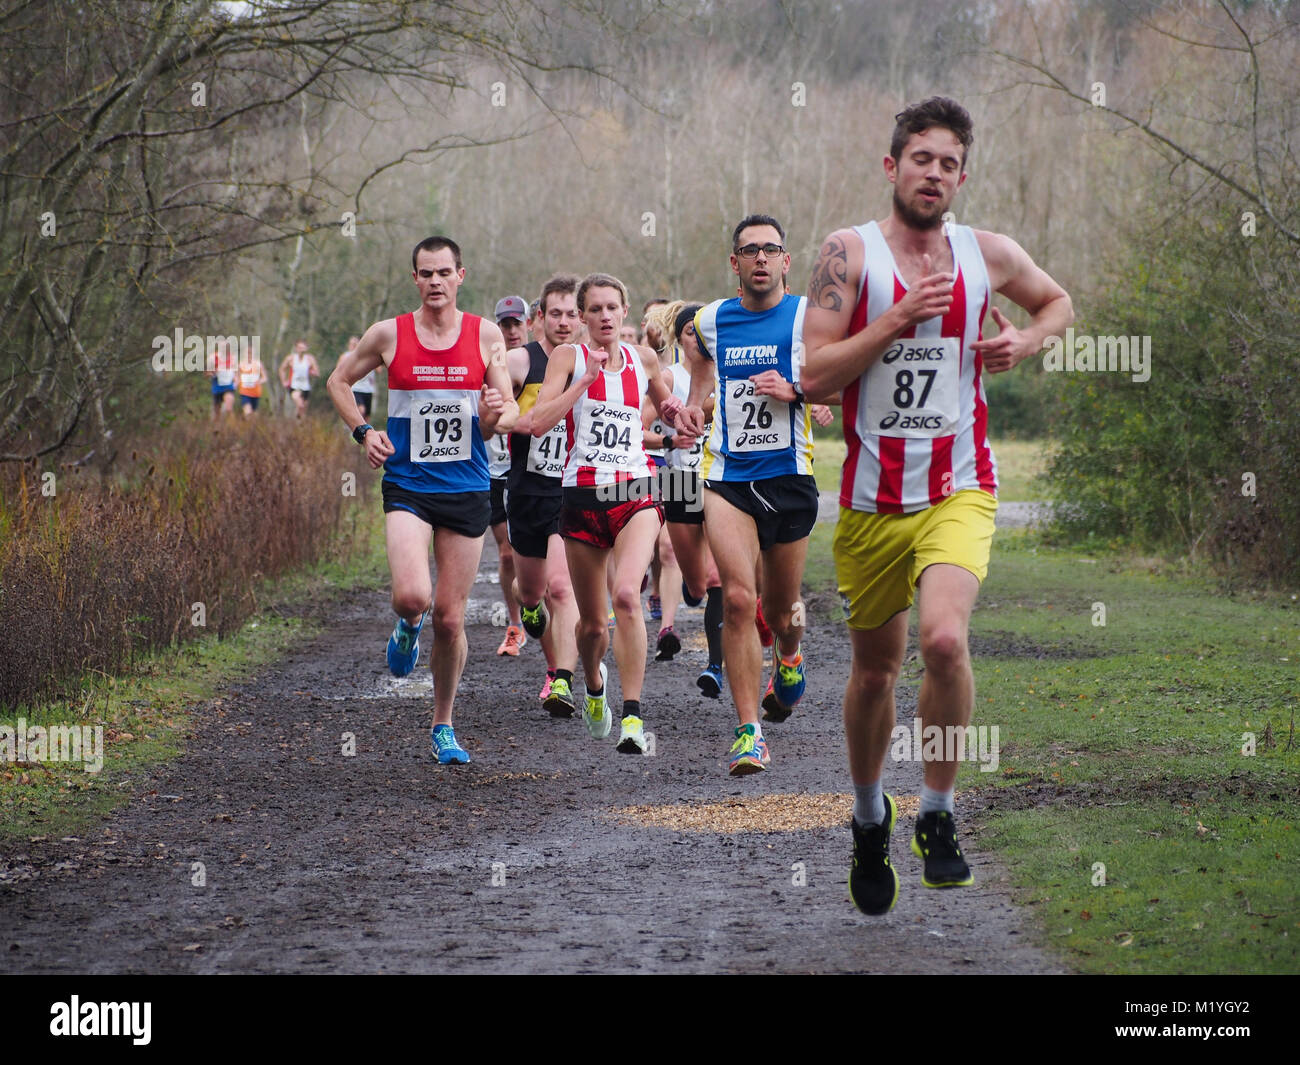 Runners taking part in an off road, trail race Stock Photo